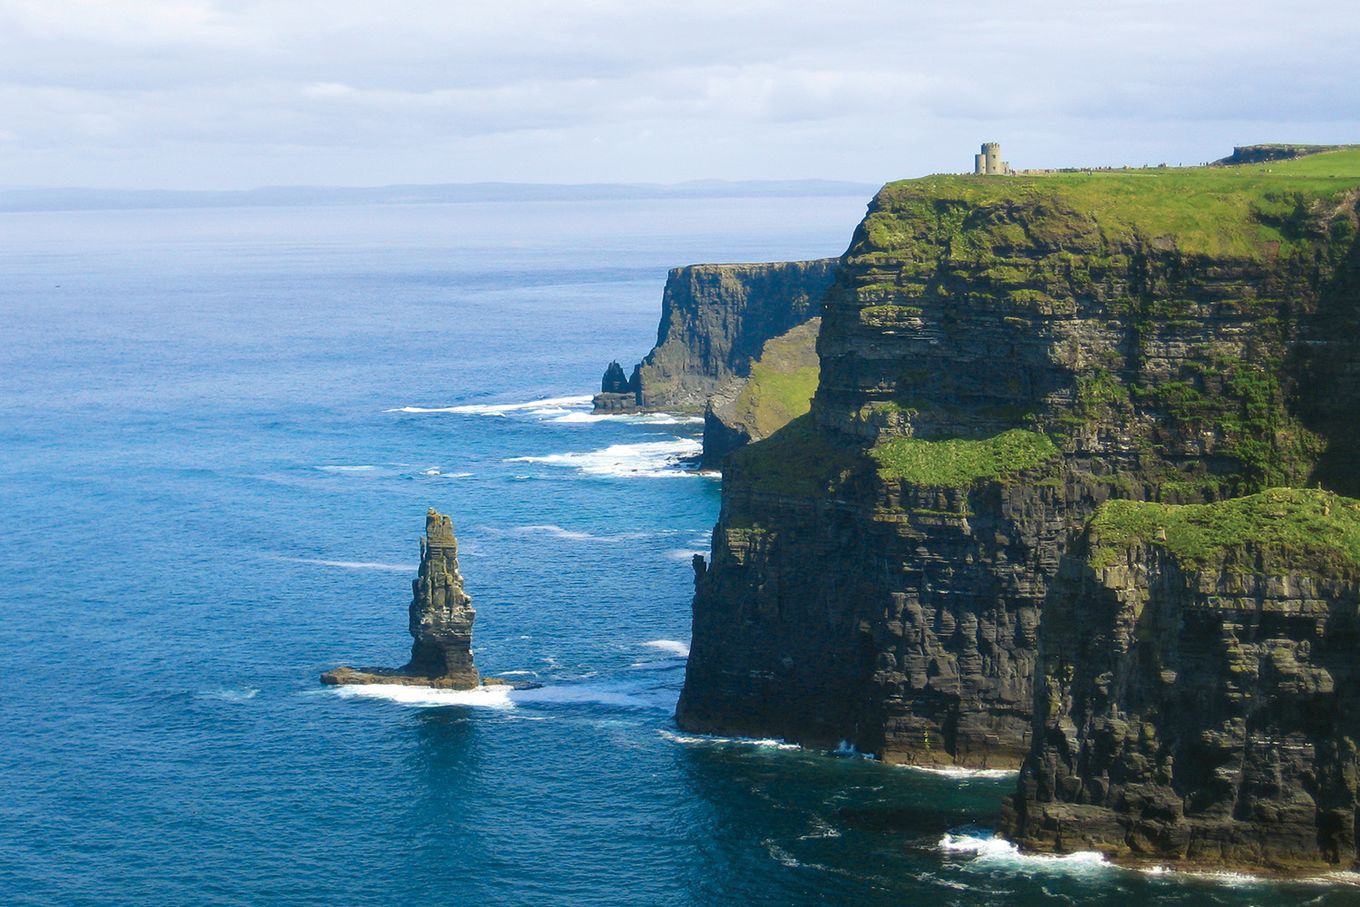 A view of sea and cliffs in Ireland.